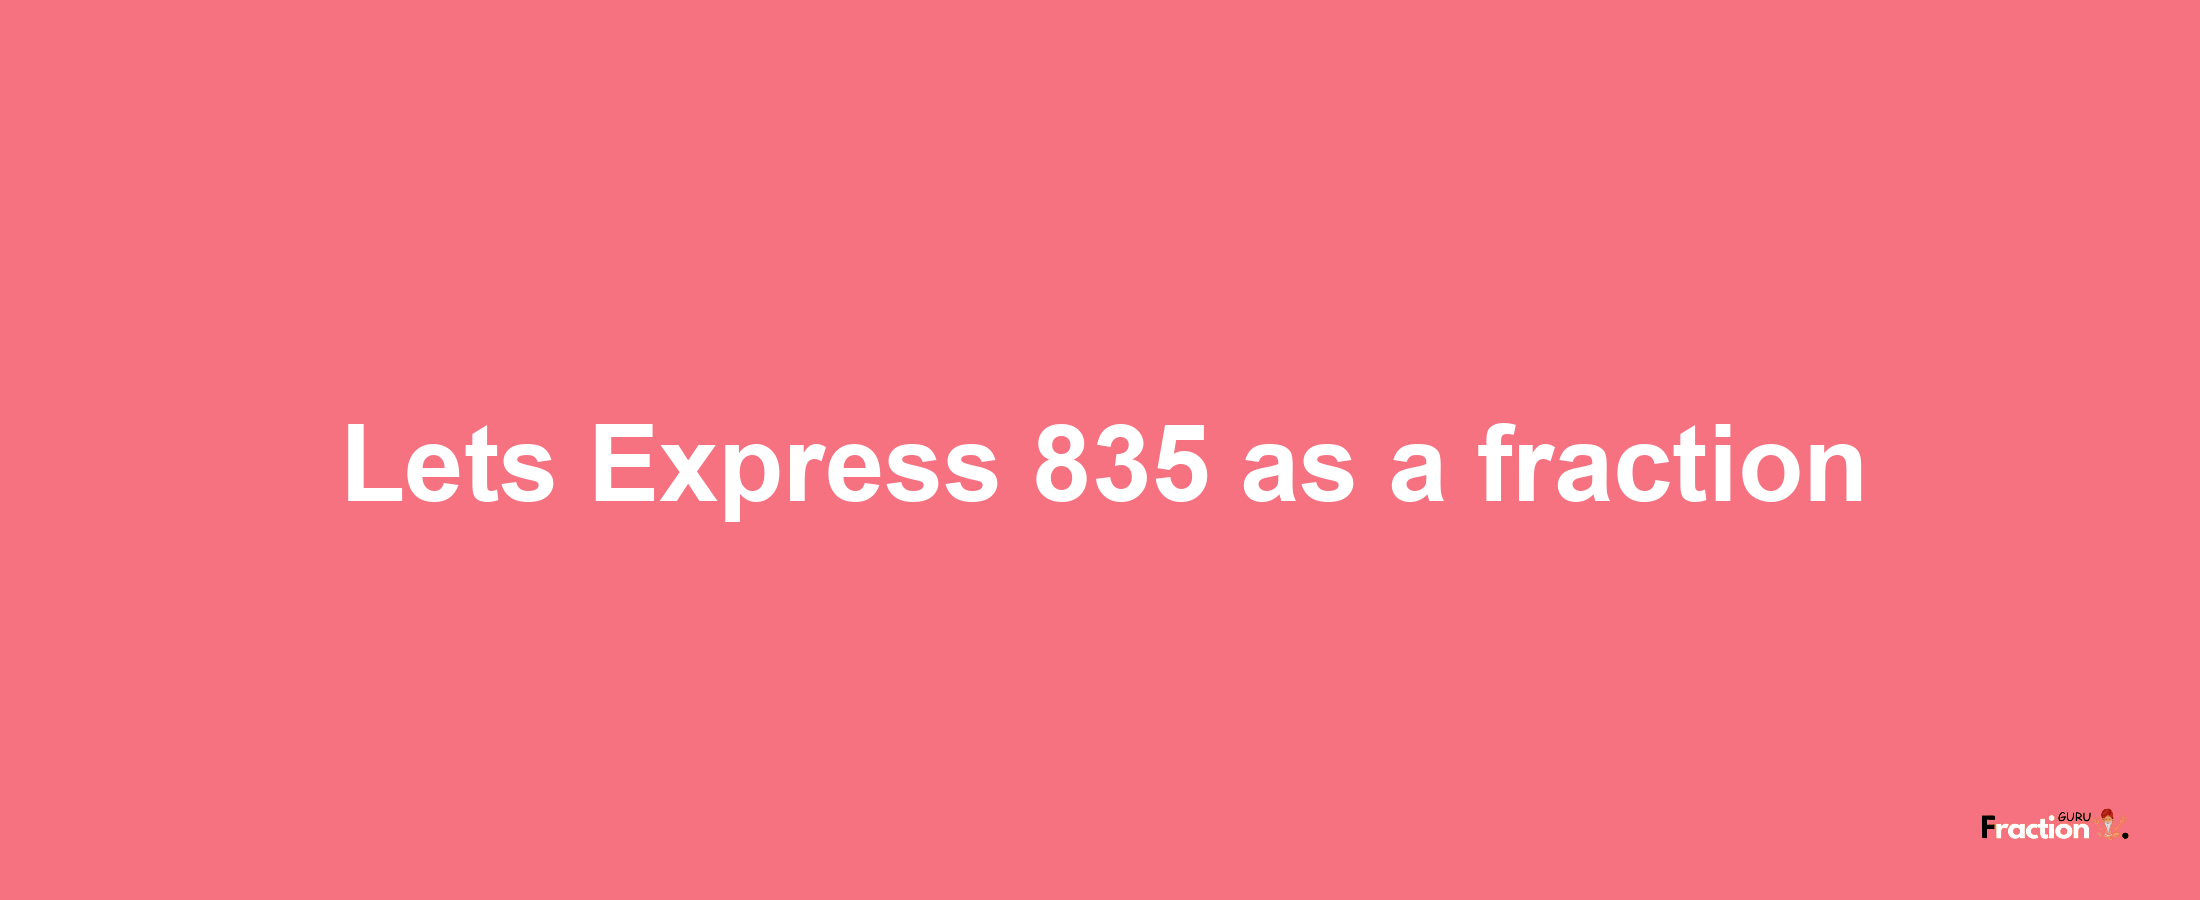 Lets Express 835 as afraction